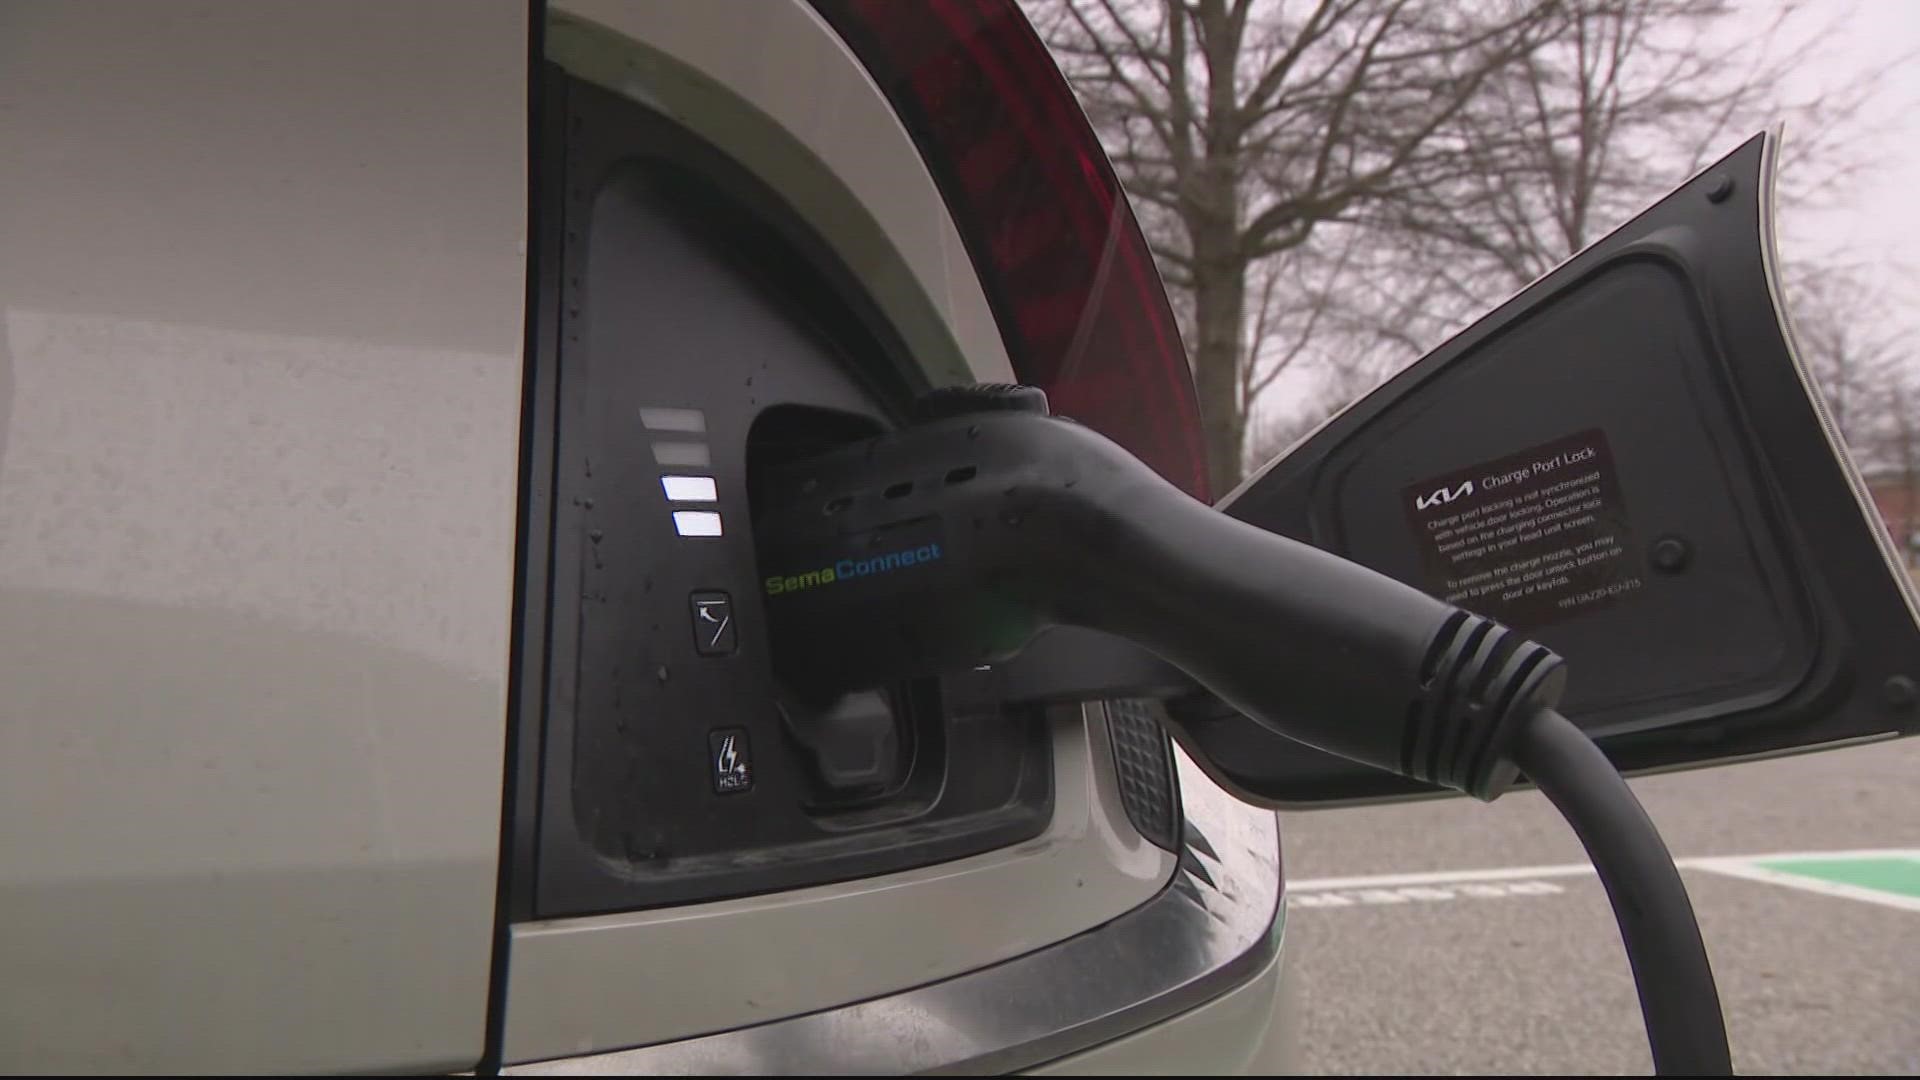 One of the nation’s largest providers of Electric Vehicle charging stations has its roots in Maryland and is poised to grow rapidly.